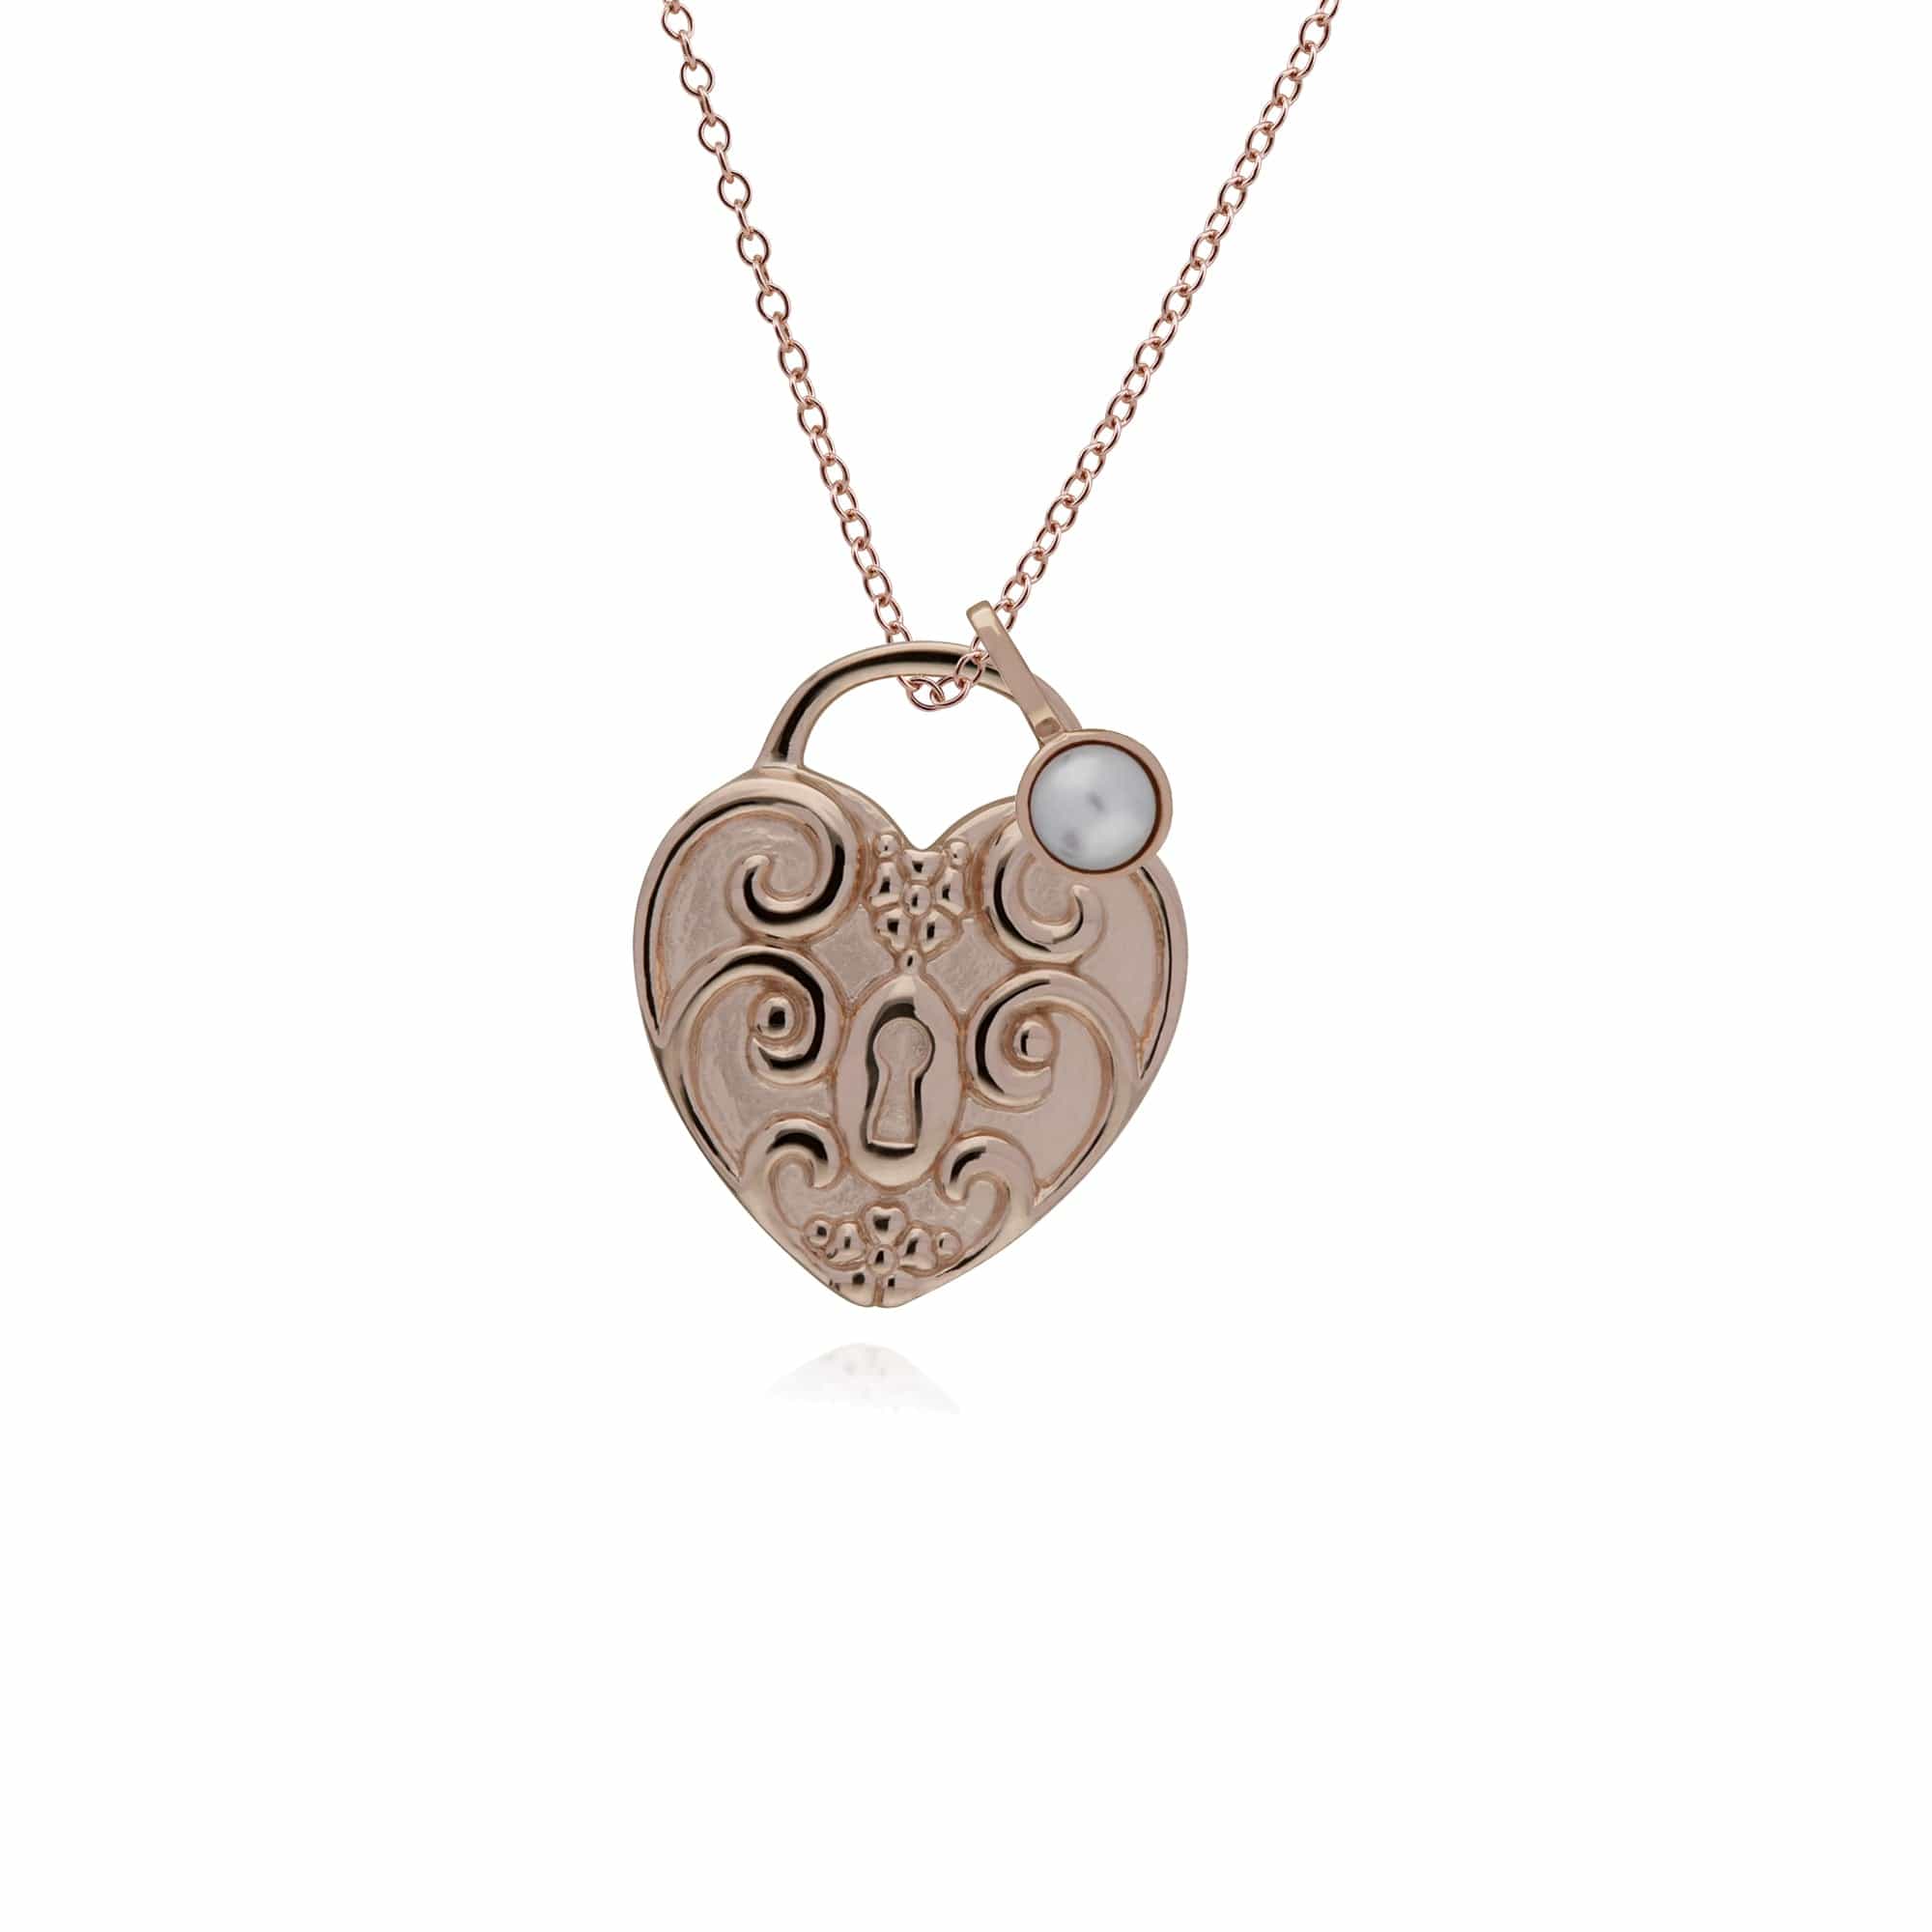 270P025701925-270P026501925 Classic Swirl Heart Lock Pendant & Pearl Charm in Rose Gold Plated 925 Sterling Silver 1